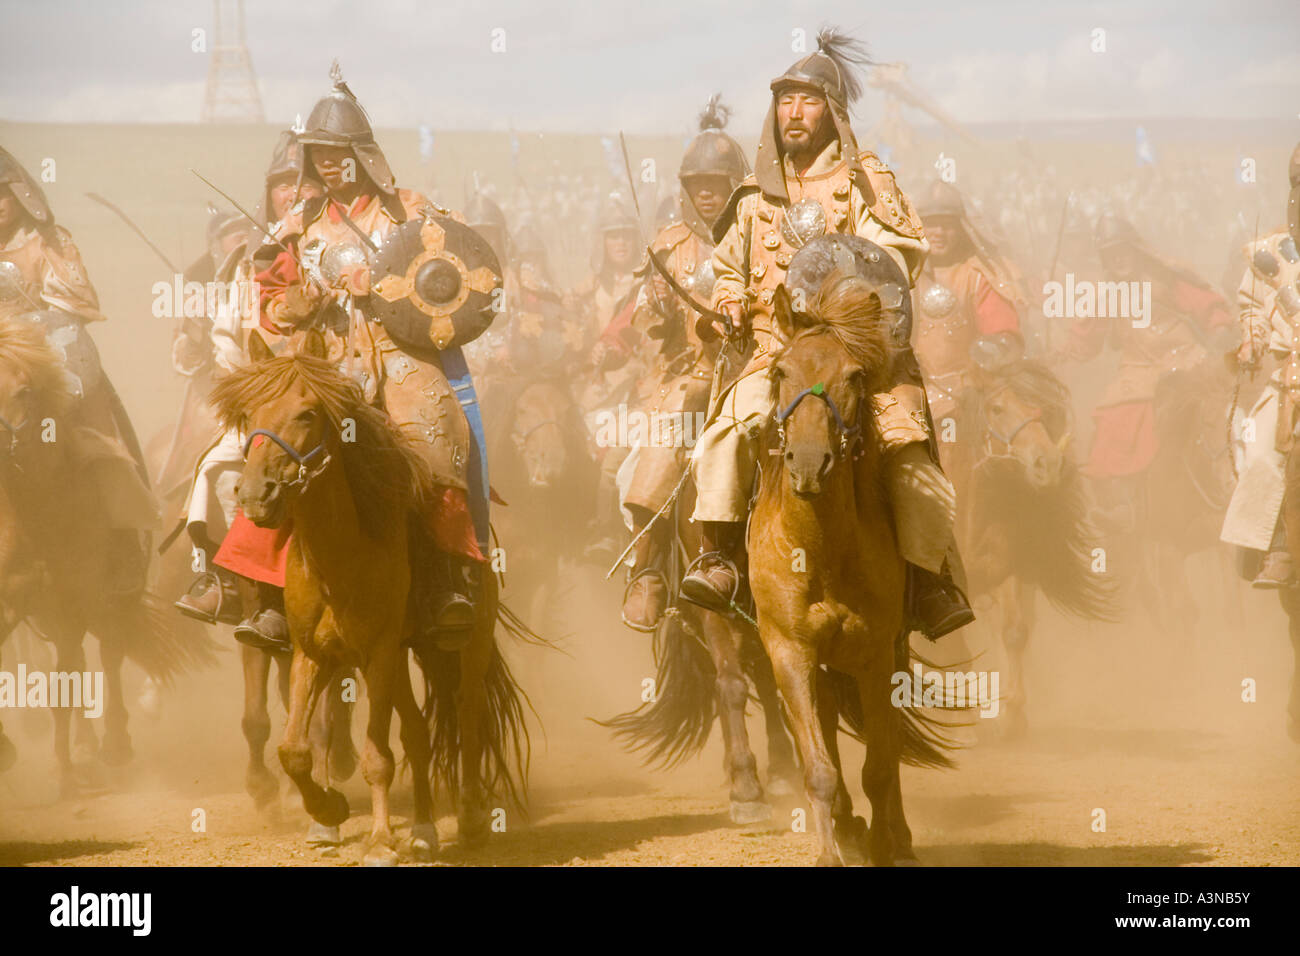 Gengis Khan's soldiers on horseback, armed with spears and shields Stock Photo